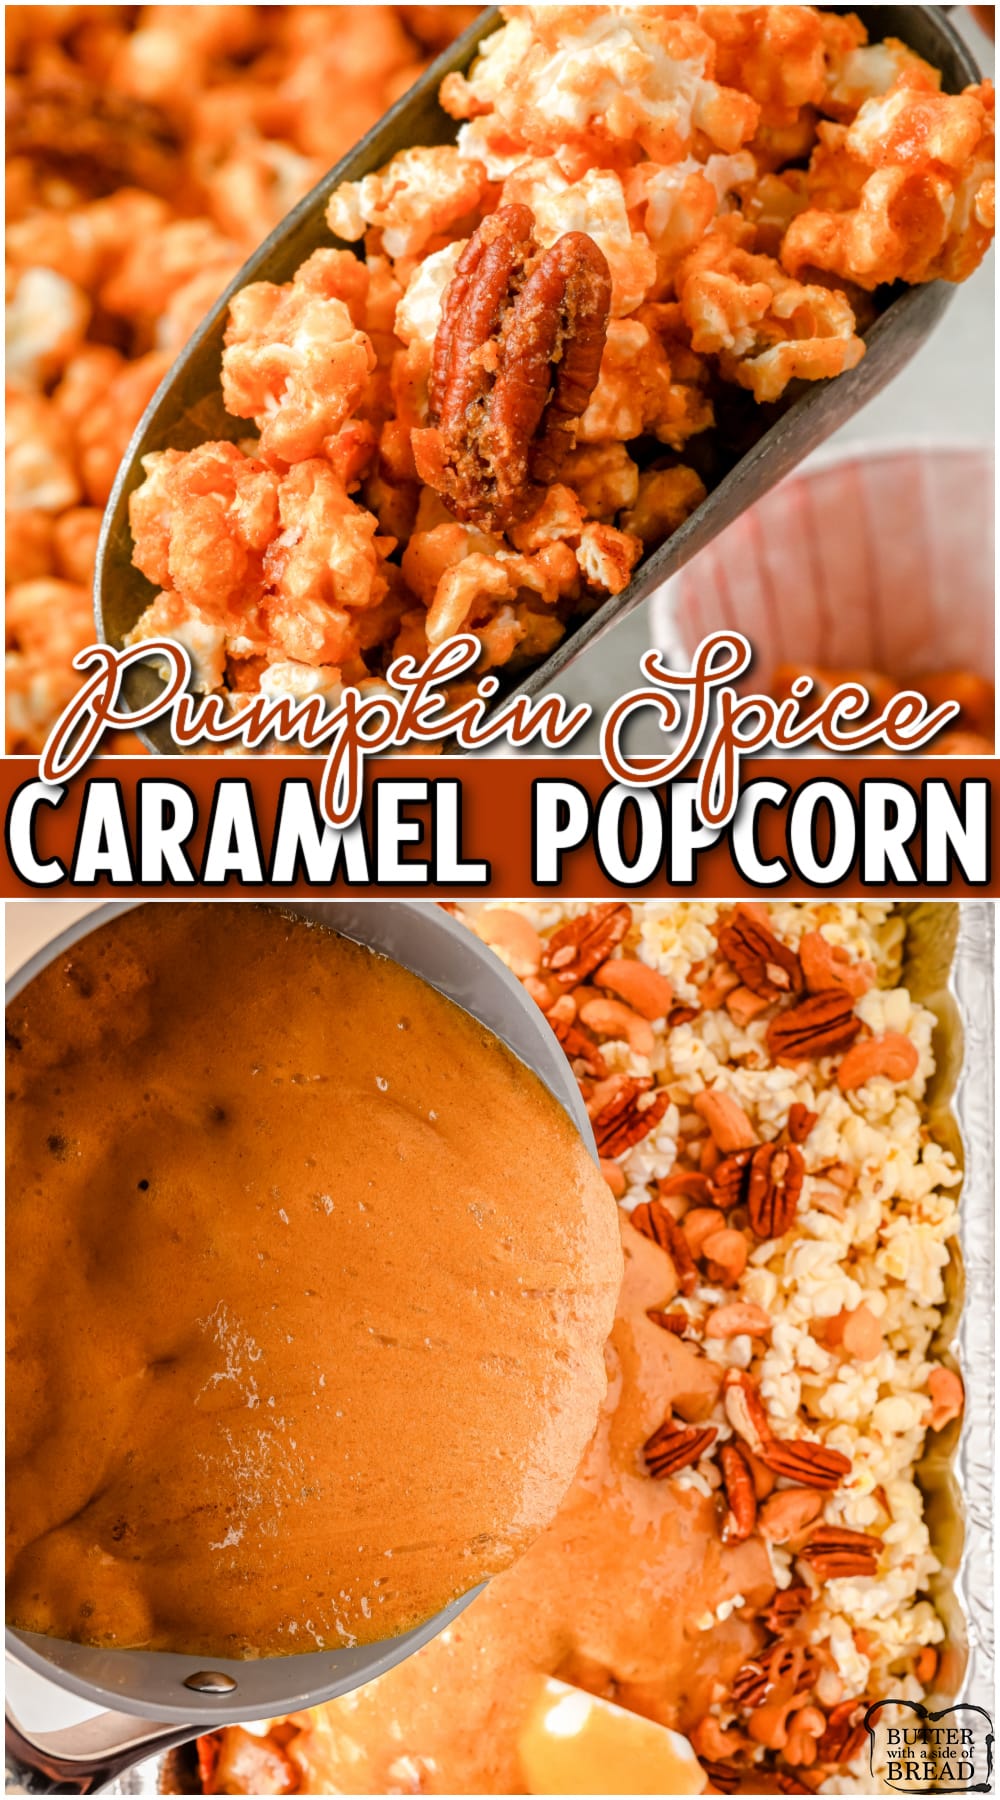 Pumpkin spice caramel popcorn combines the best flavors into one incredible treat! This recipe for homemade caramel popcorn adds warm Fall spices into sweet caramel corn everyone enjoys.